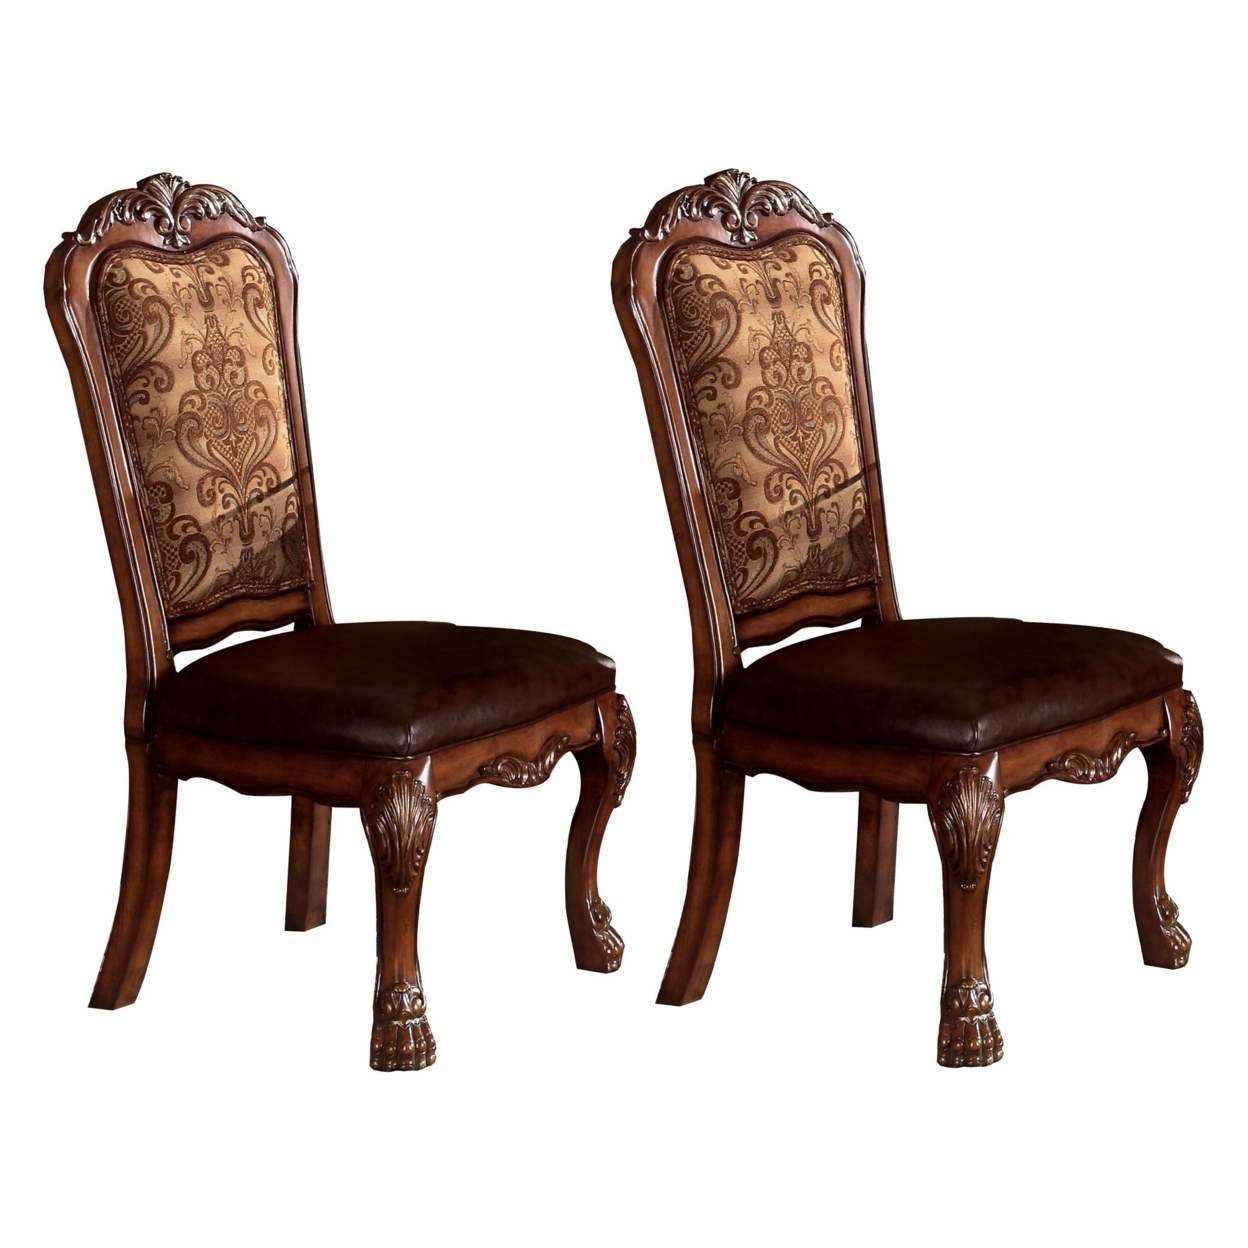 Wooden Side Chair With Claw Legs And Leatherette Seat, Brown, Set Of Two- Saltoro Sherpi